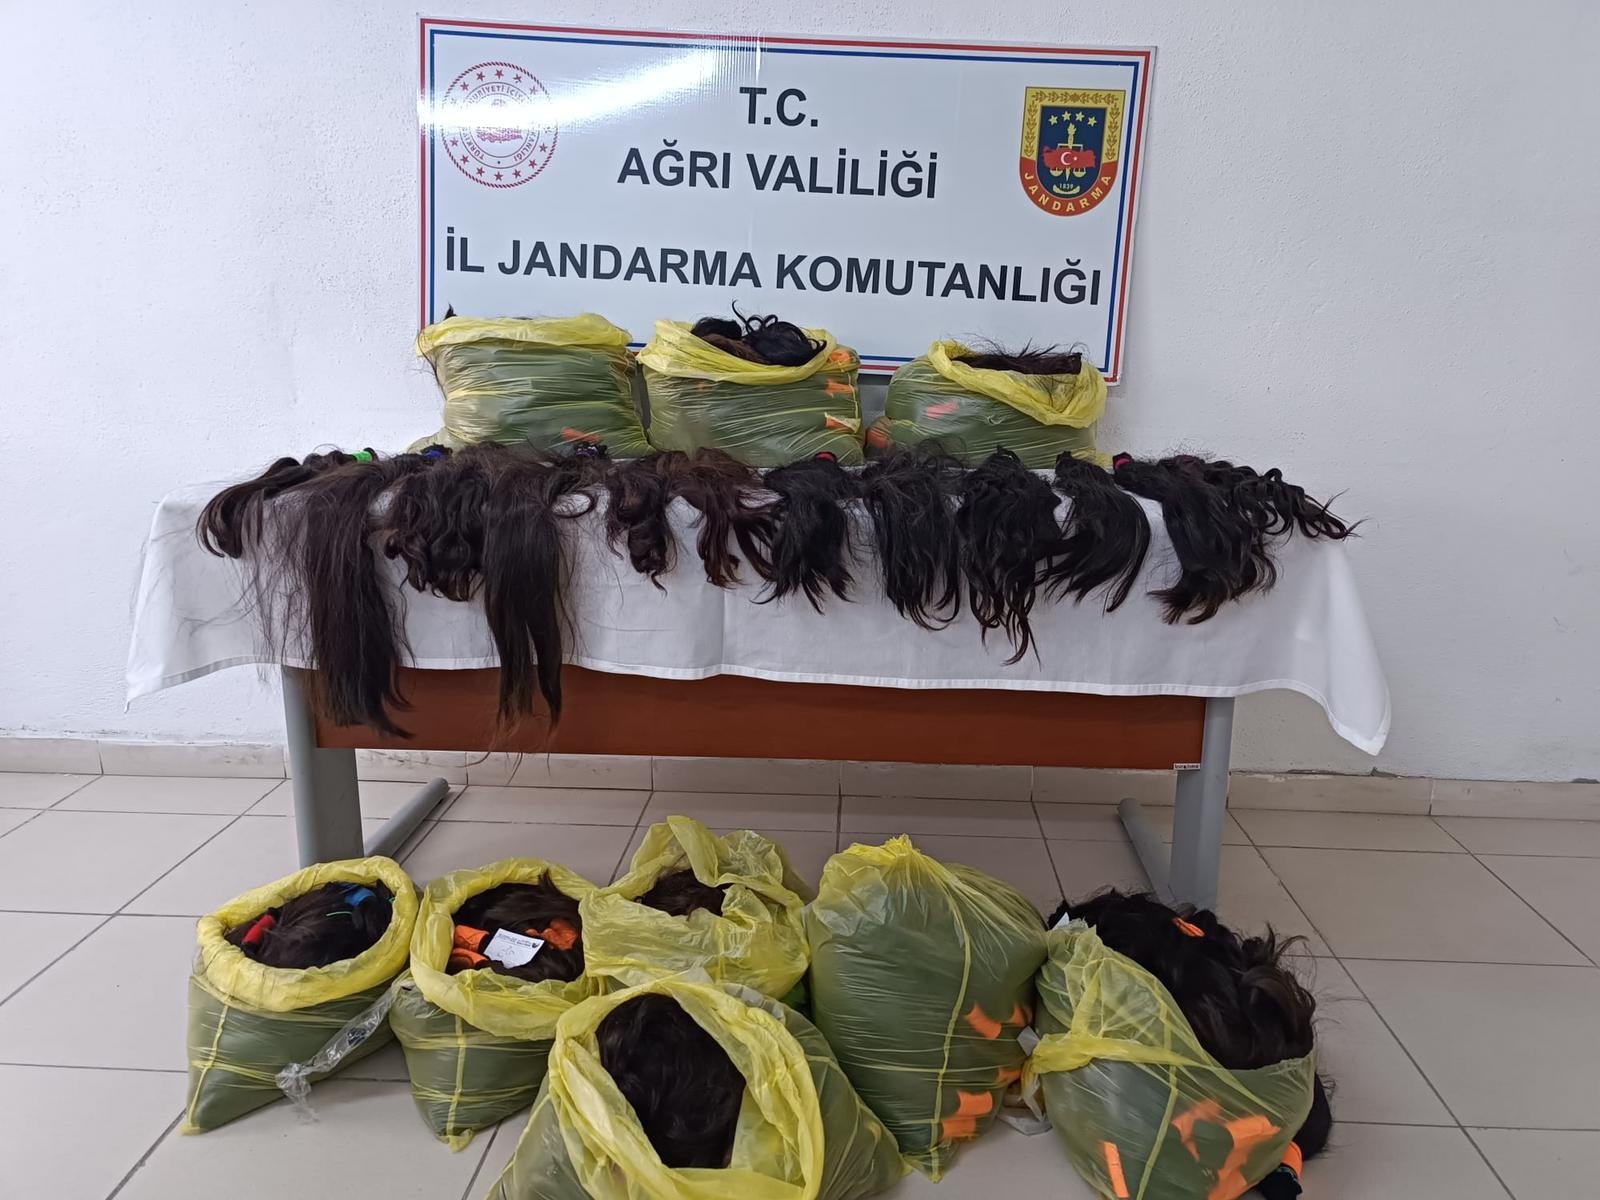 Bunches of human hair seized by authorities are seen in the Doğubayazıt district of Ağrı, eastern Türkiye, May 3, 2023. (AA Photo)